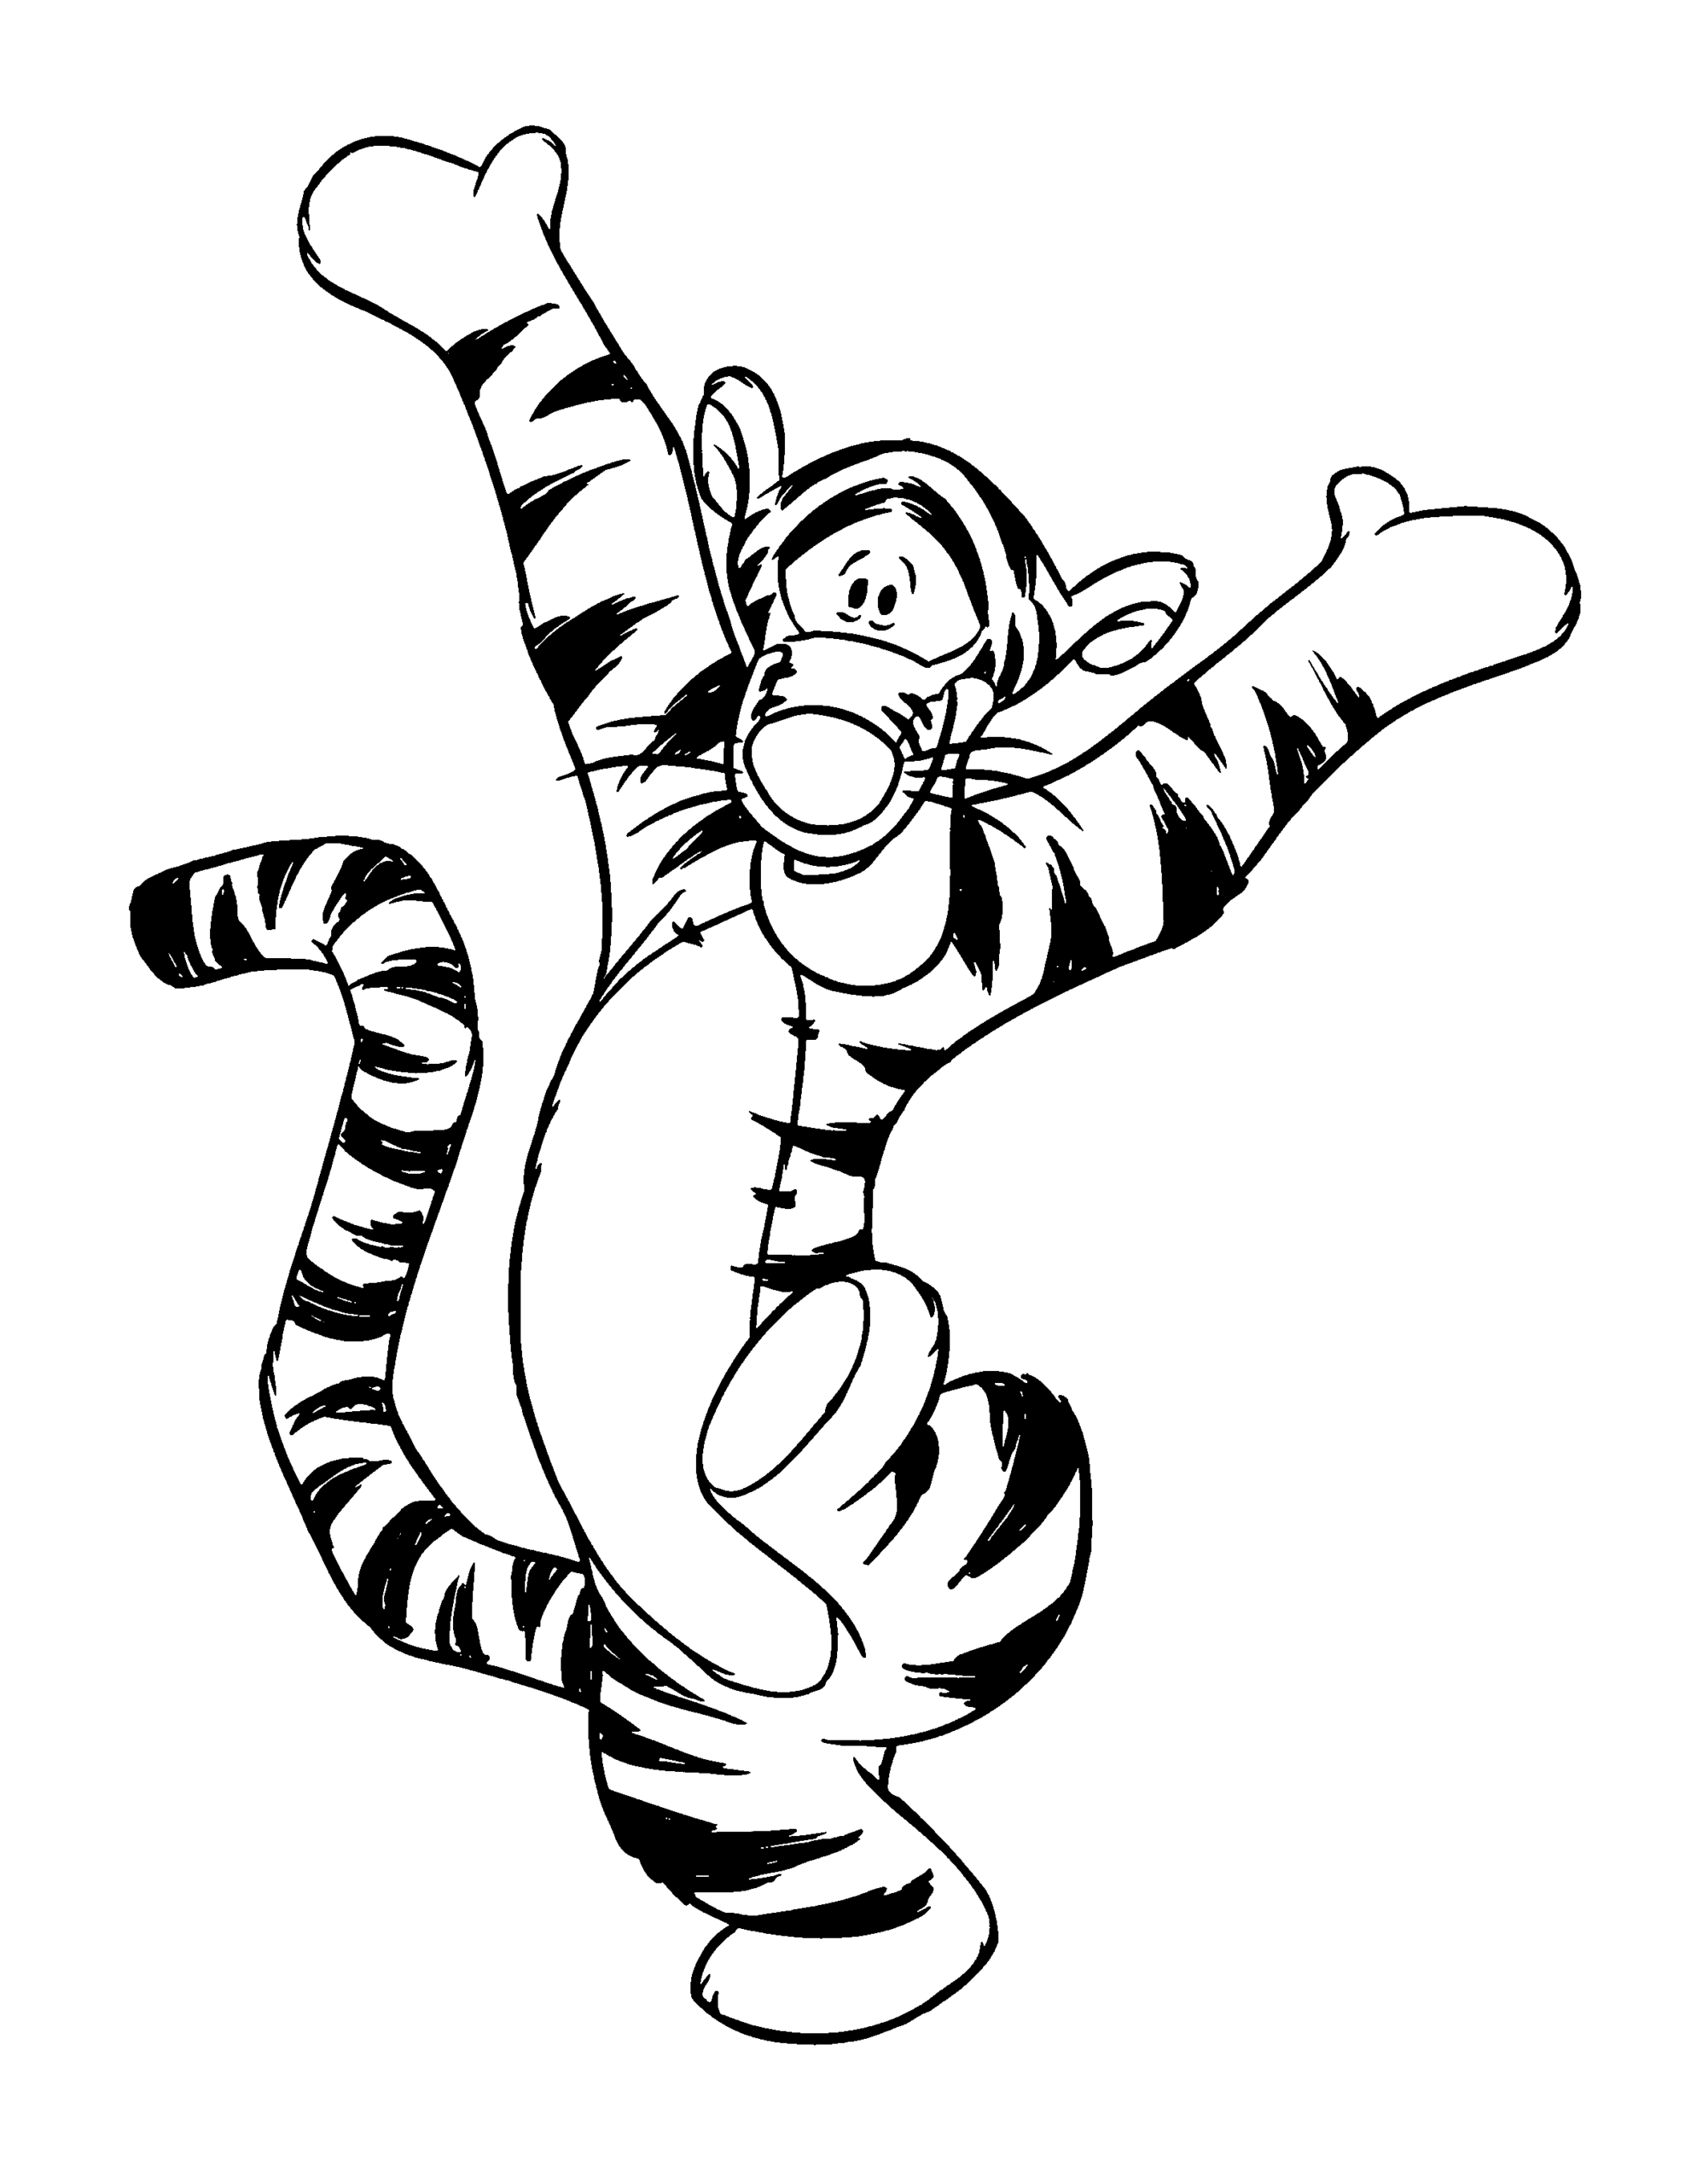 Winnie the Pooh Coloring Pages Cartoons winnie the pooh 50 Printable 2020 7161 Coloring4free